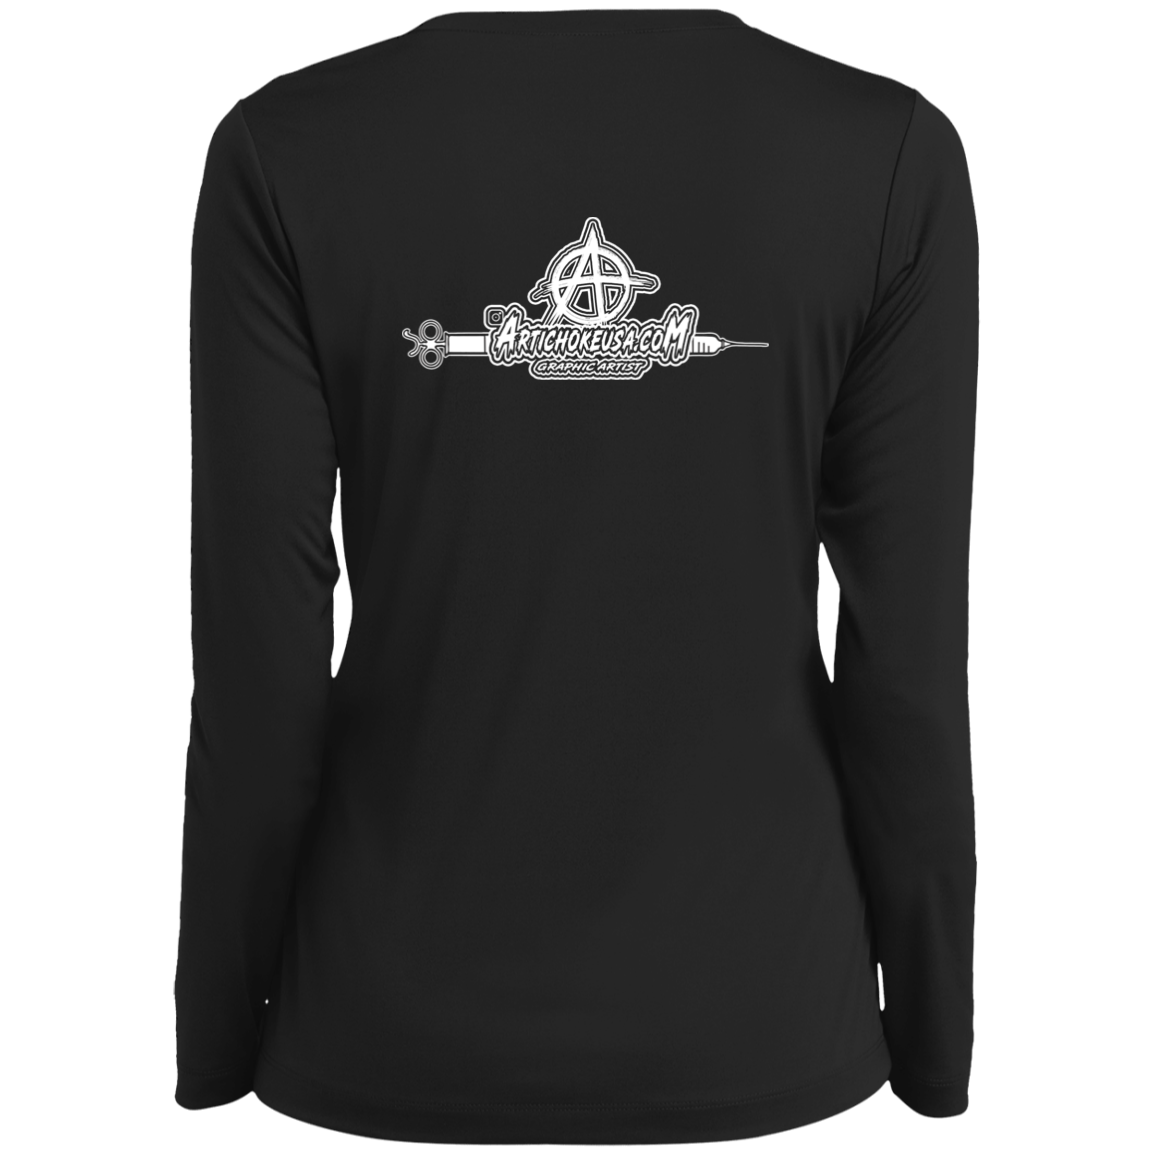 ArtichokeUSA Custom Design. Vaccinated AF (and fine). Ladies’ Long Sleeve Performance V-Neck Tee